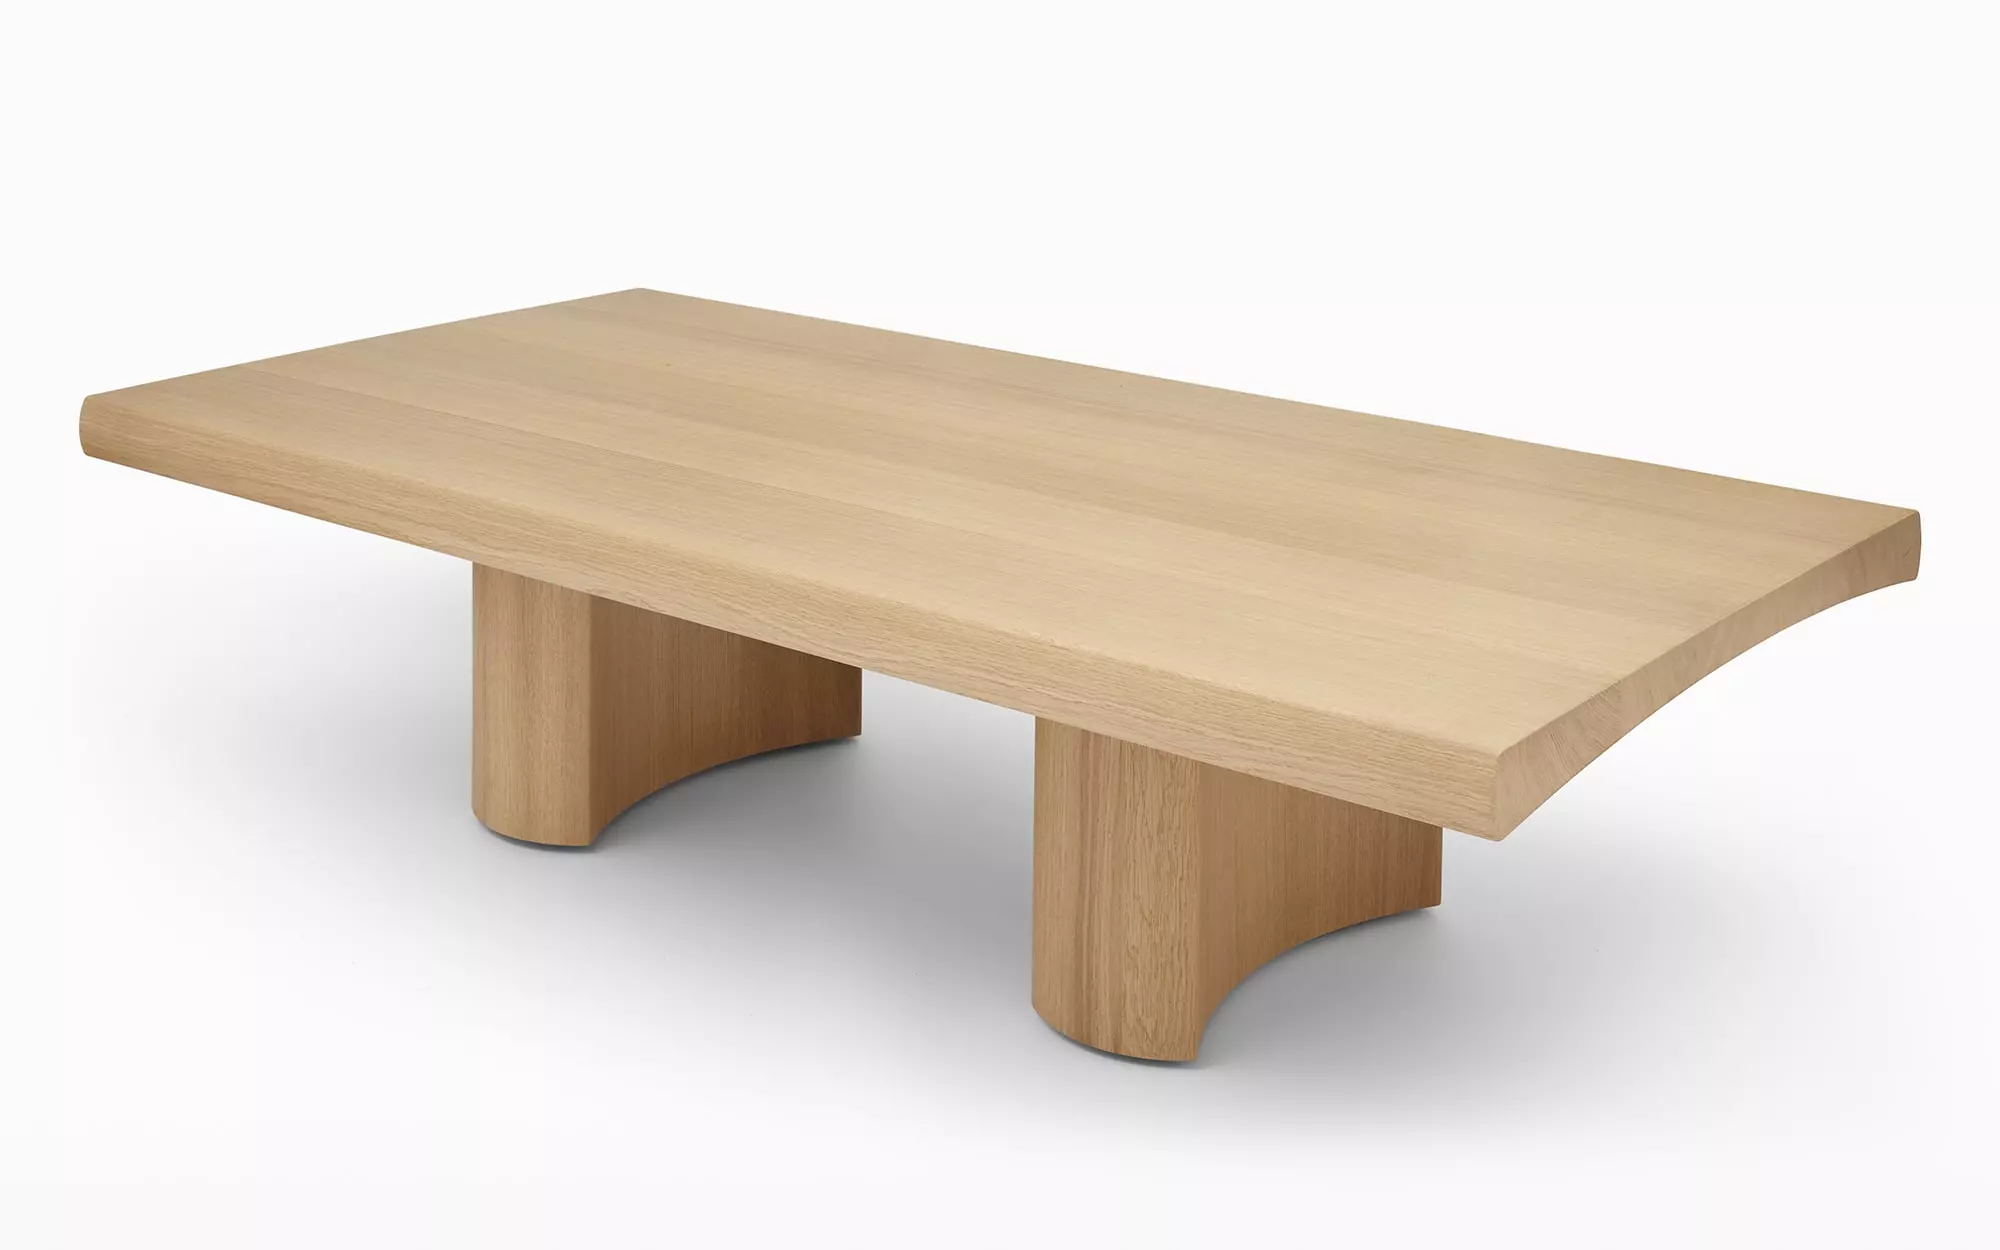 Hakone Coffee table - Edward and Jay Barber and Osgerby - Seating - Galerie kreo